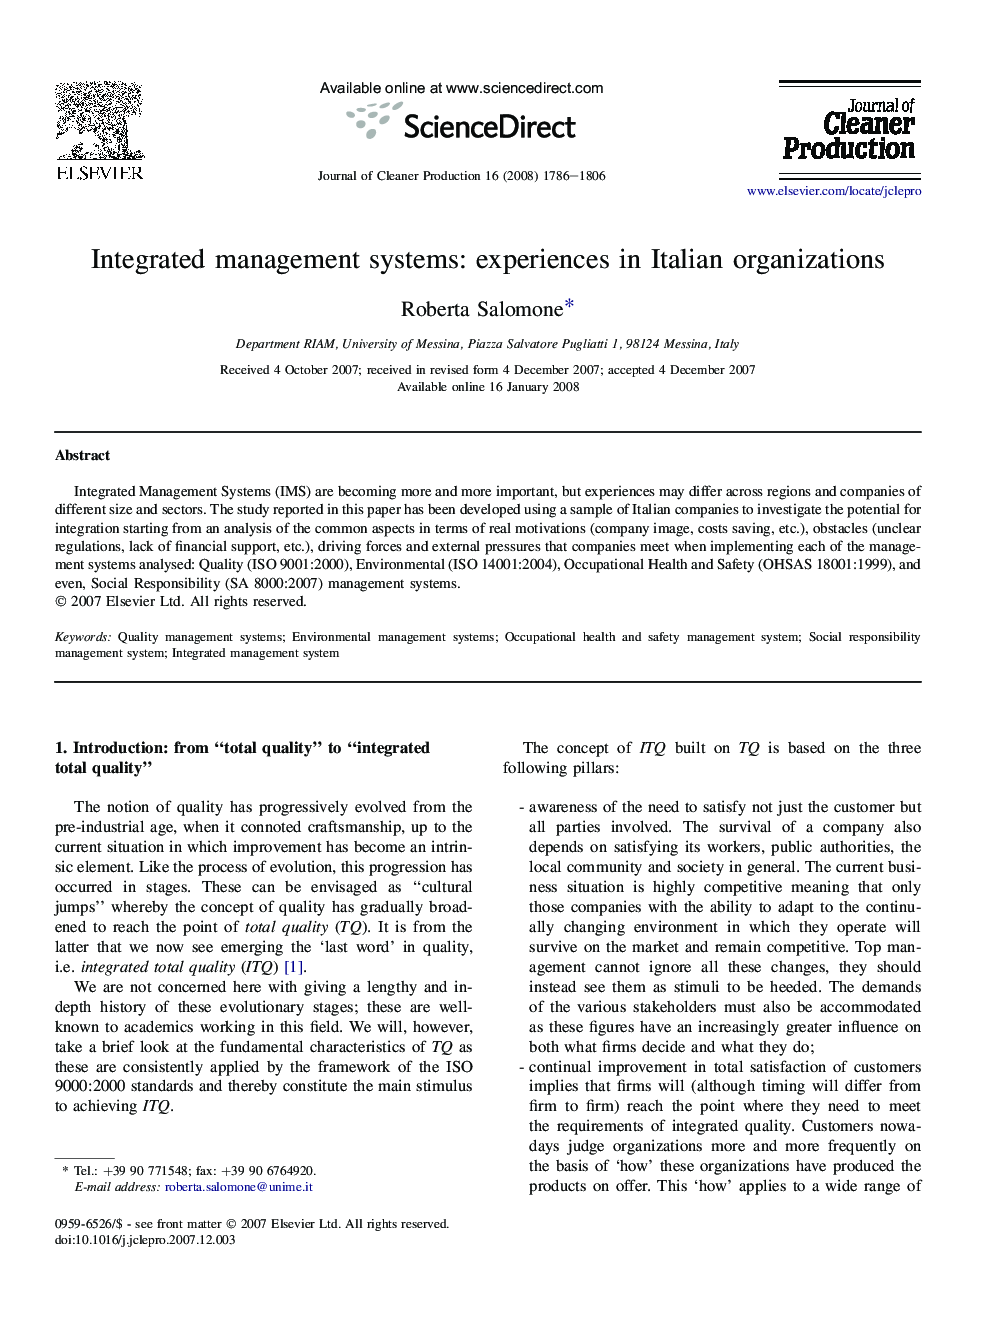 Integrated management systems: experiences in Italian organizations